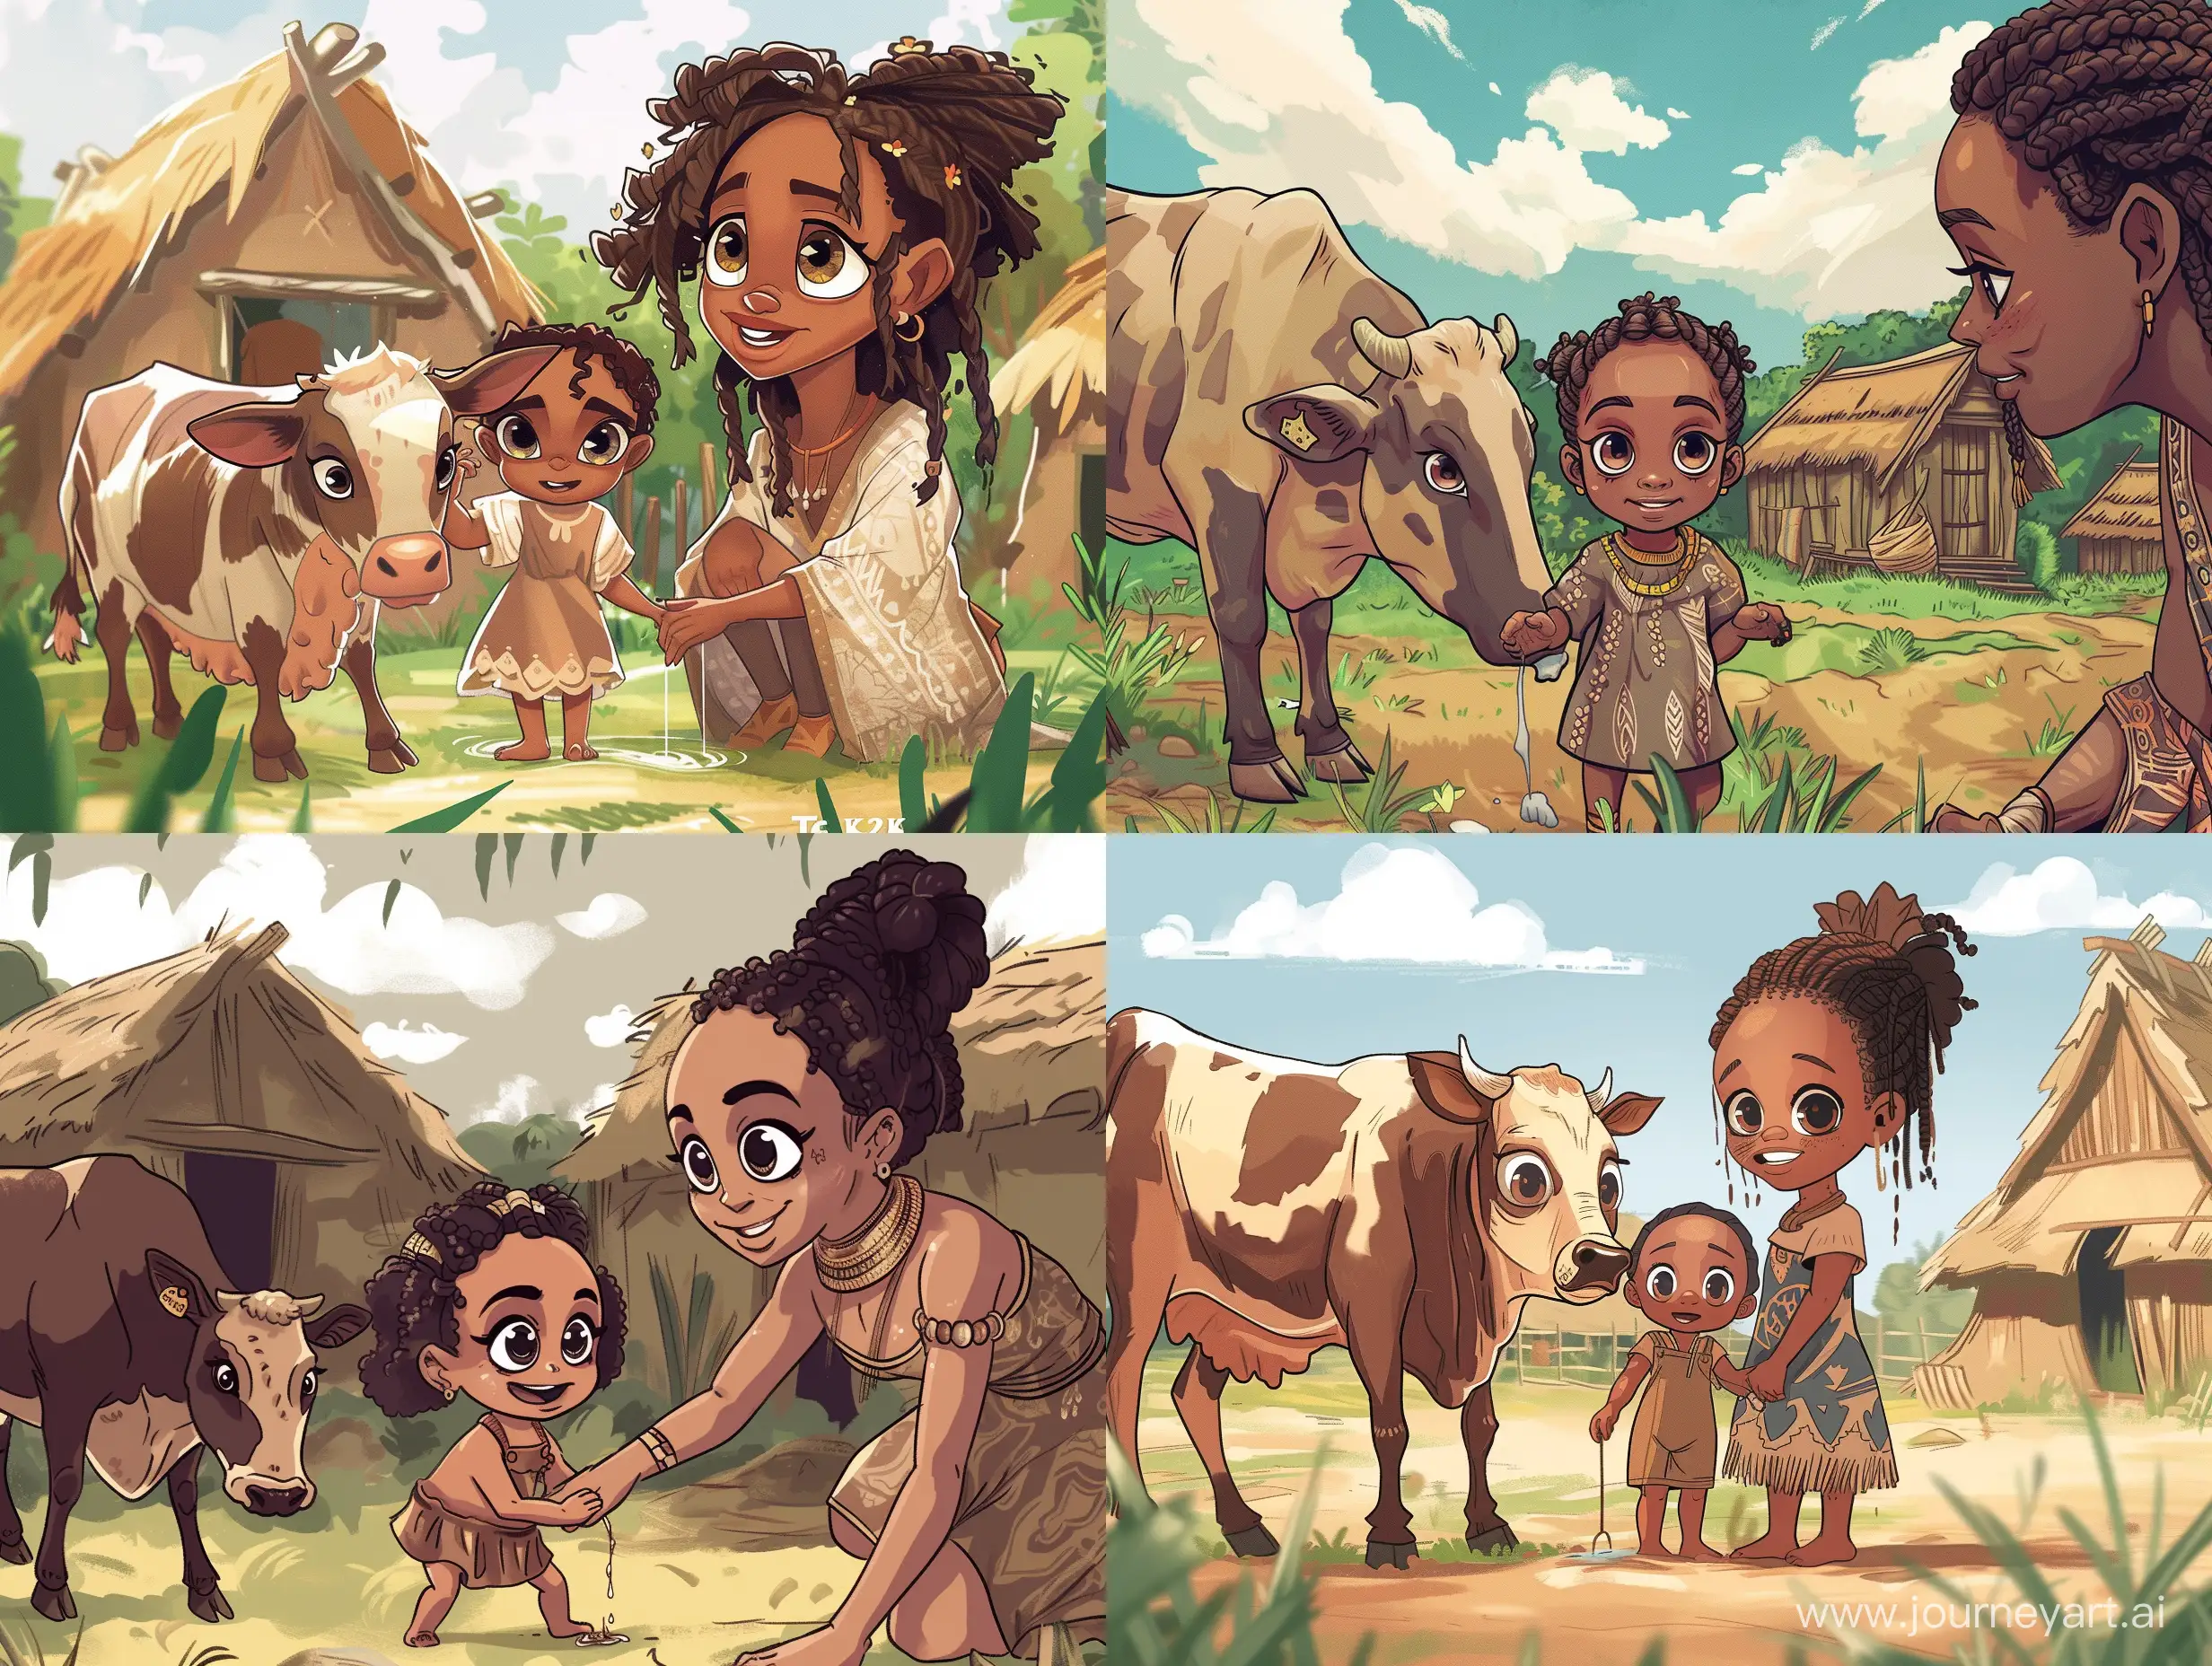 An illustration of tino an African 2 year old girl with expressive big eyes helping her mother milk a cow. The surrounding have 2 huts and Tino's mother Tekat beautiful woman with braids and a village dress. All should be express as cartoon aime characters